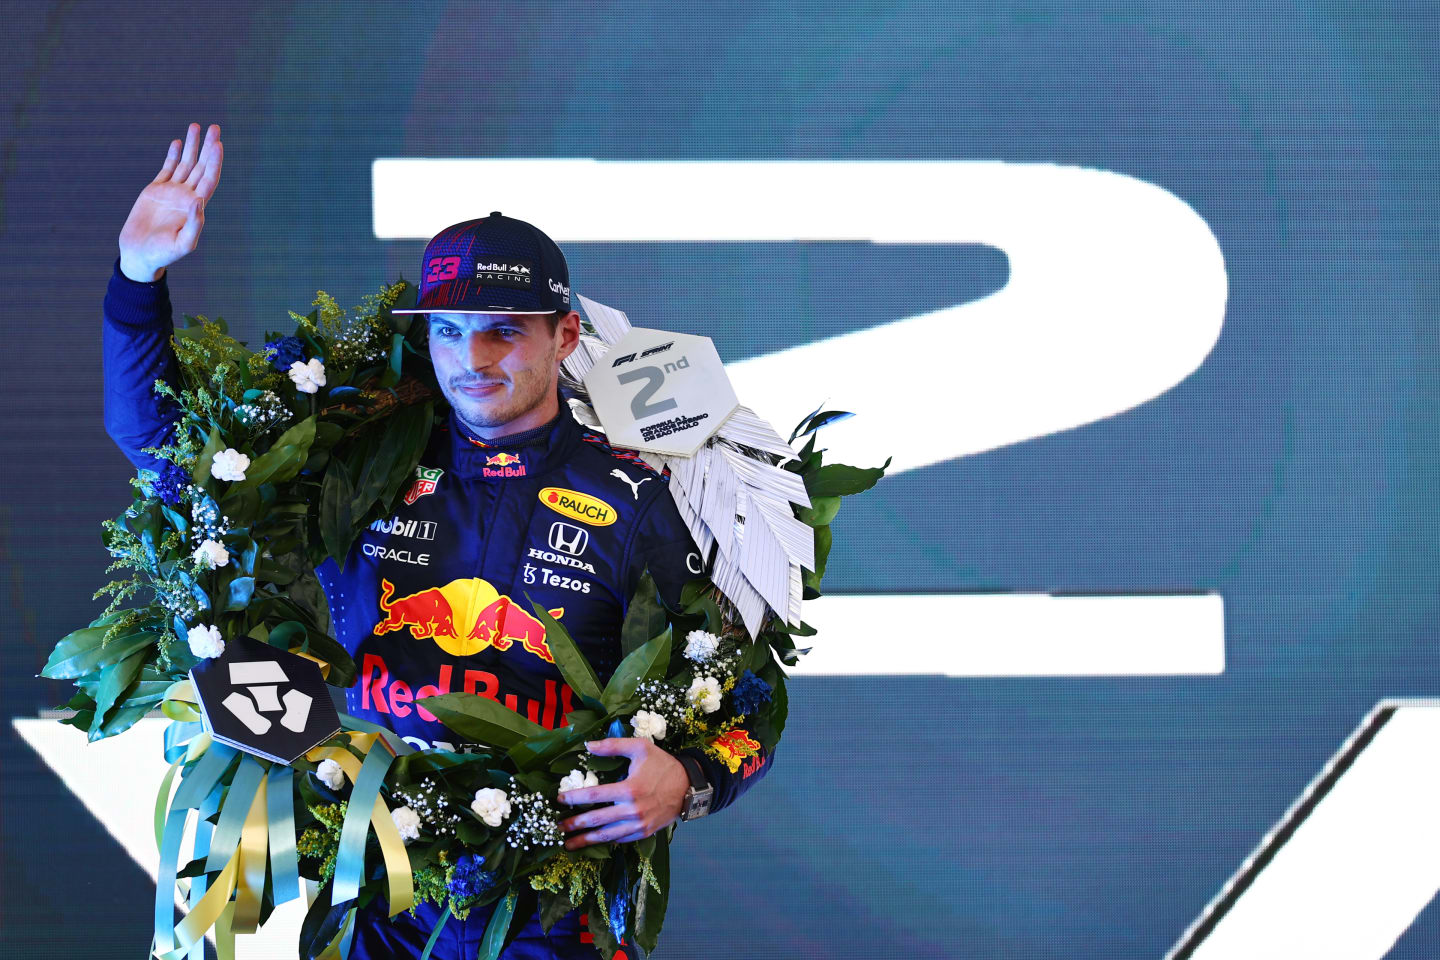 SAO PAULO, BRAZIL - NOVEMBER 13: Second placed Max Verstappen of Netherlands and Red Bull Racing